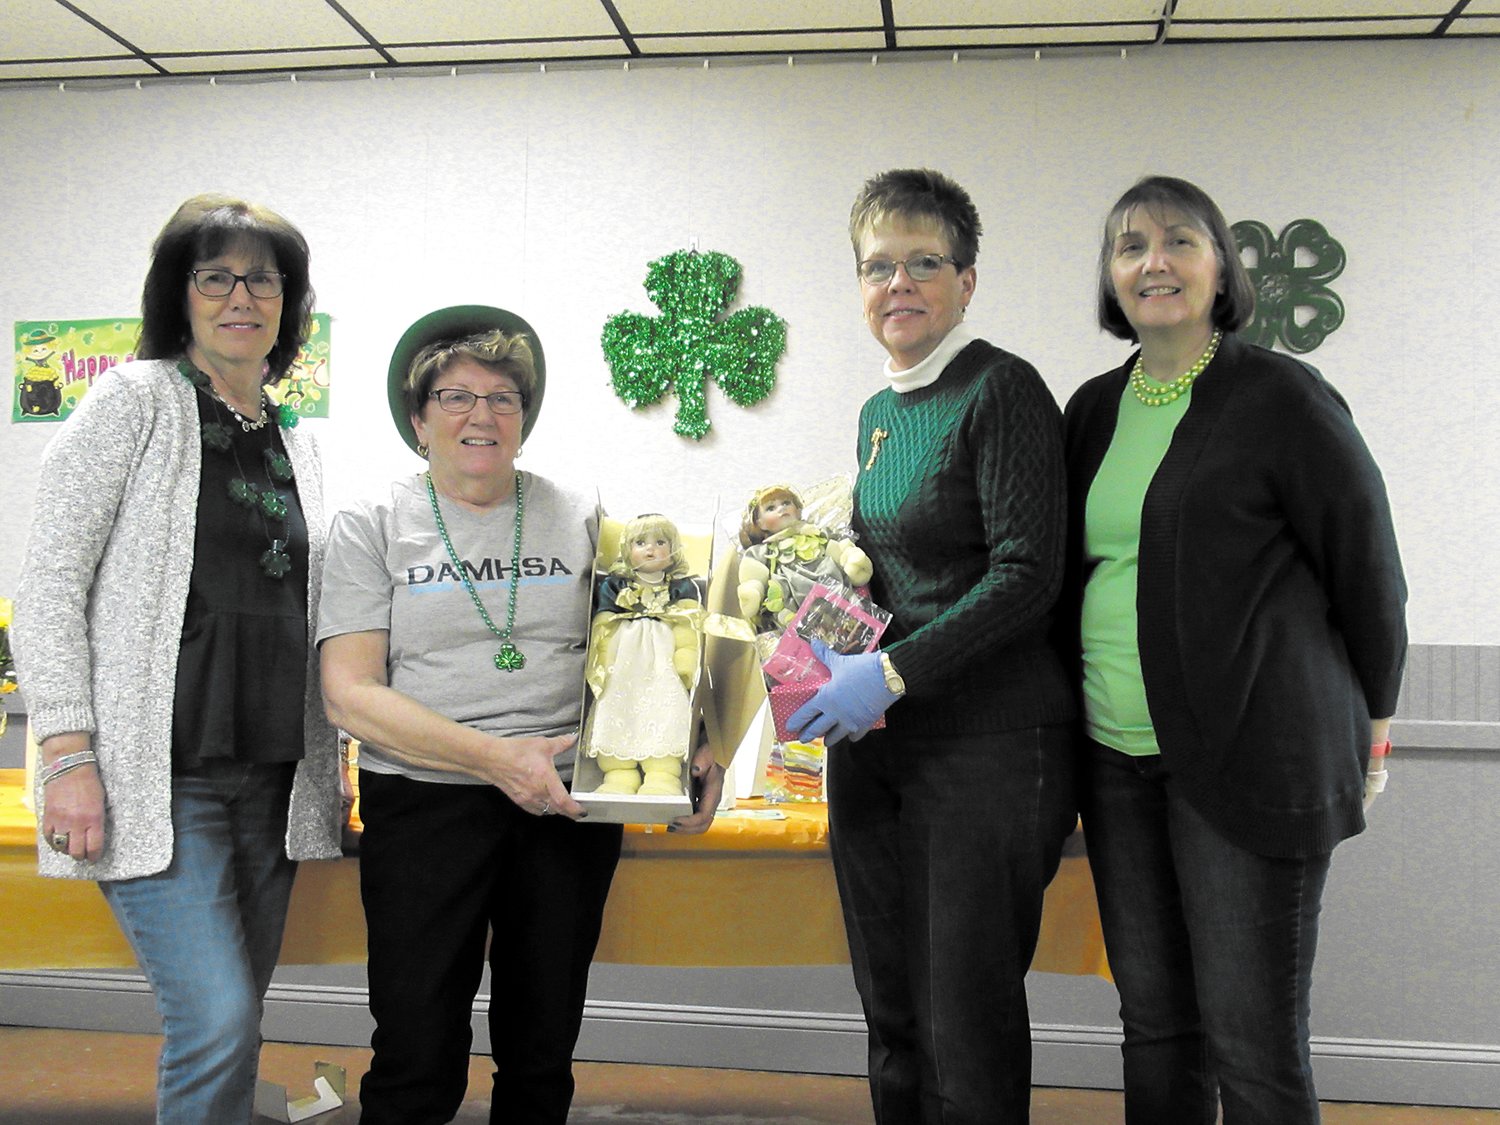 (Top) SUPER STAFF: Carol DeLory, Mariane Beirne, Deb Petisce and Sue Hartington were among the many Tri-City Elks members who made last Saturday’s St. Patrick’ Day Party extra special by decorating Lodge 14 then helping serve the dinner